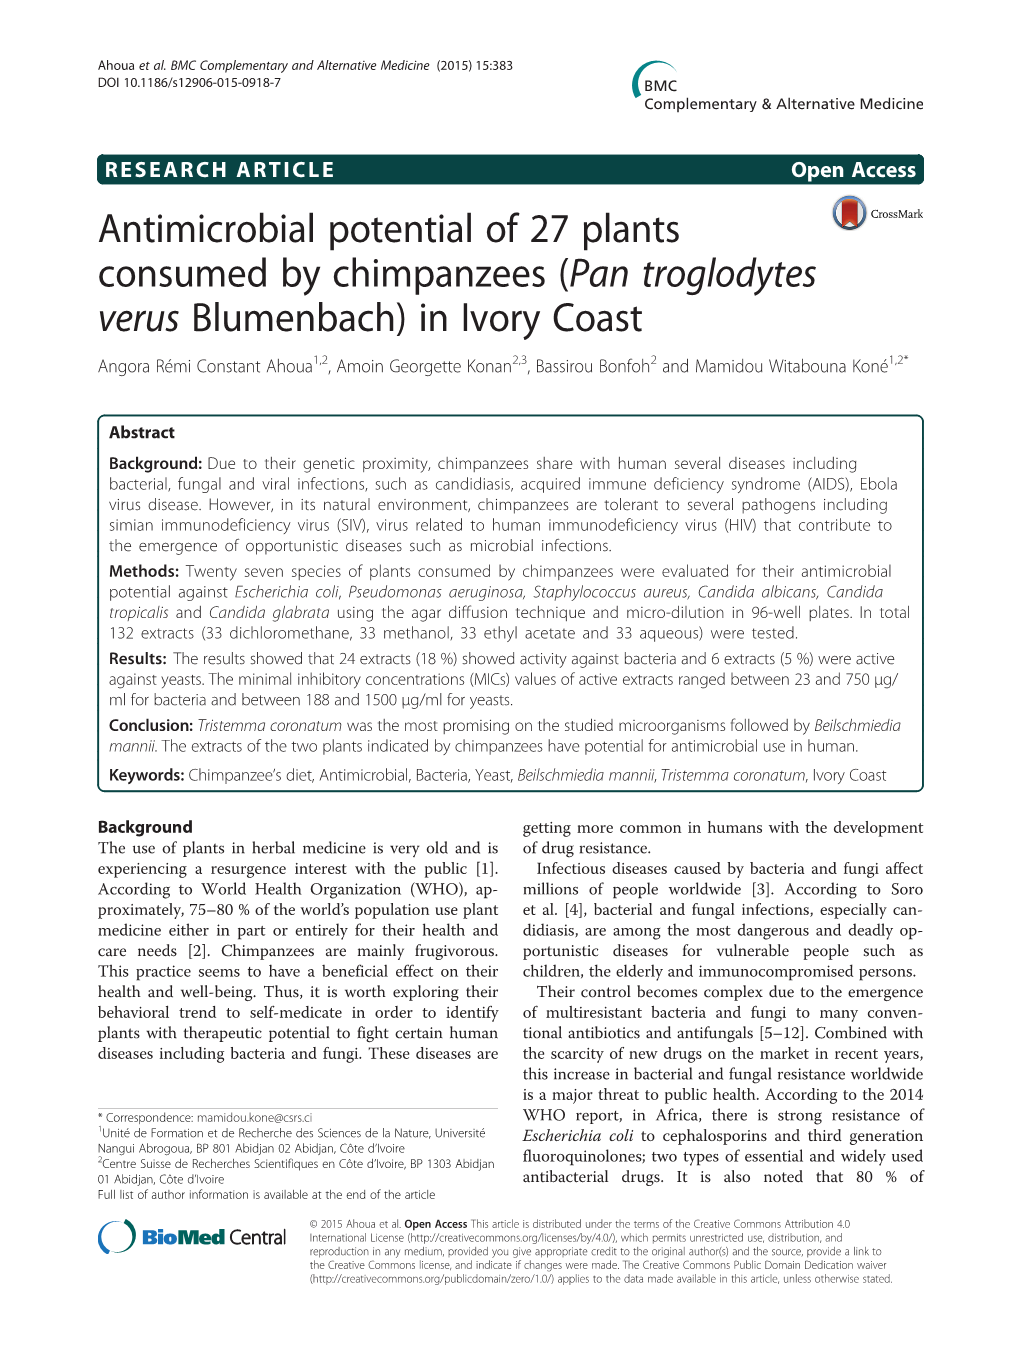 Antimicrobial Potential of 27 Plants Consumed By